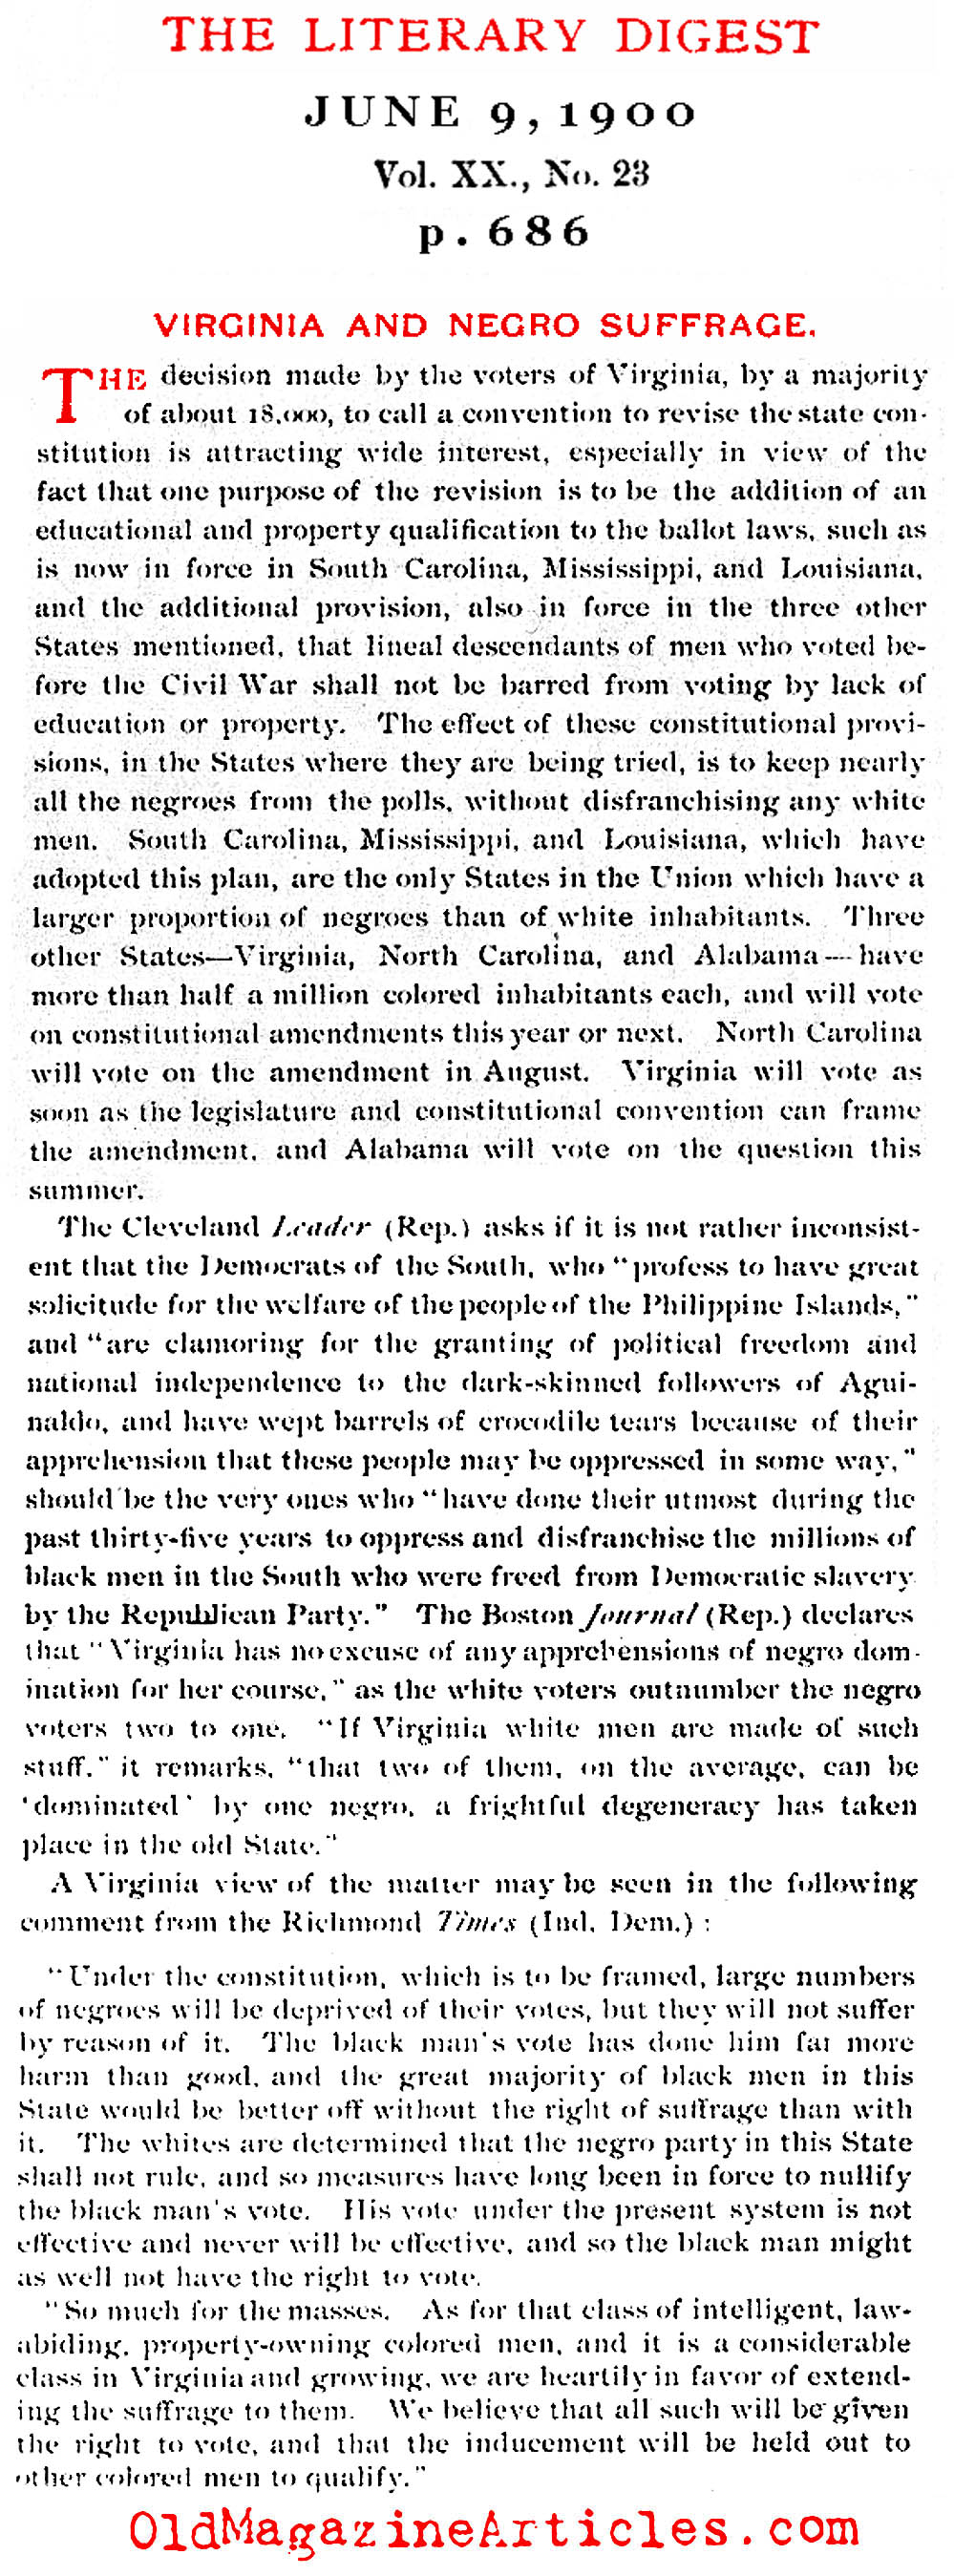 ''Virginia and Negro Suffrage'' (Literary Digest, 1900)